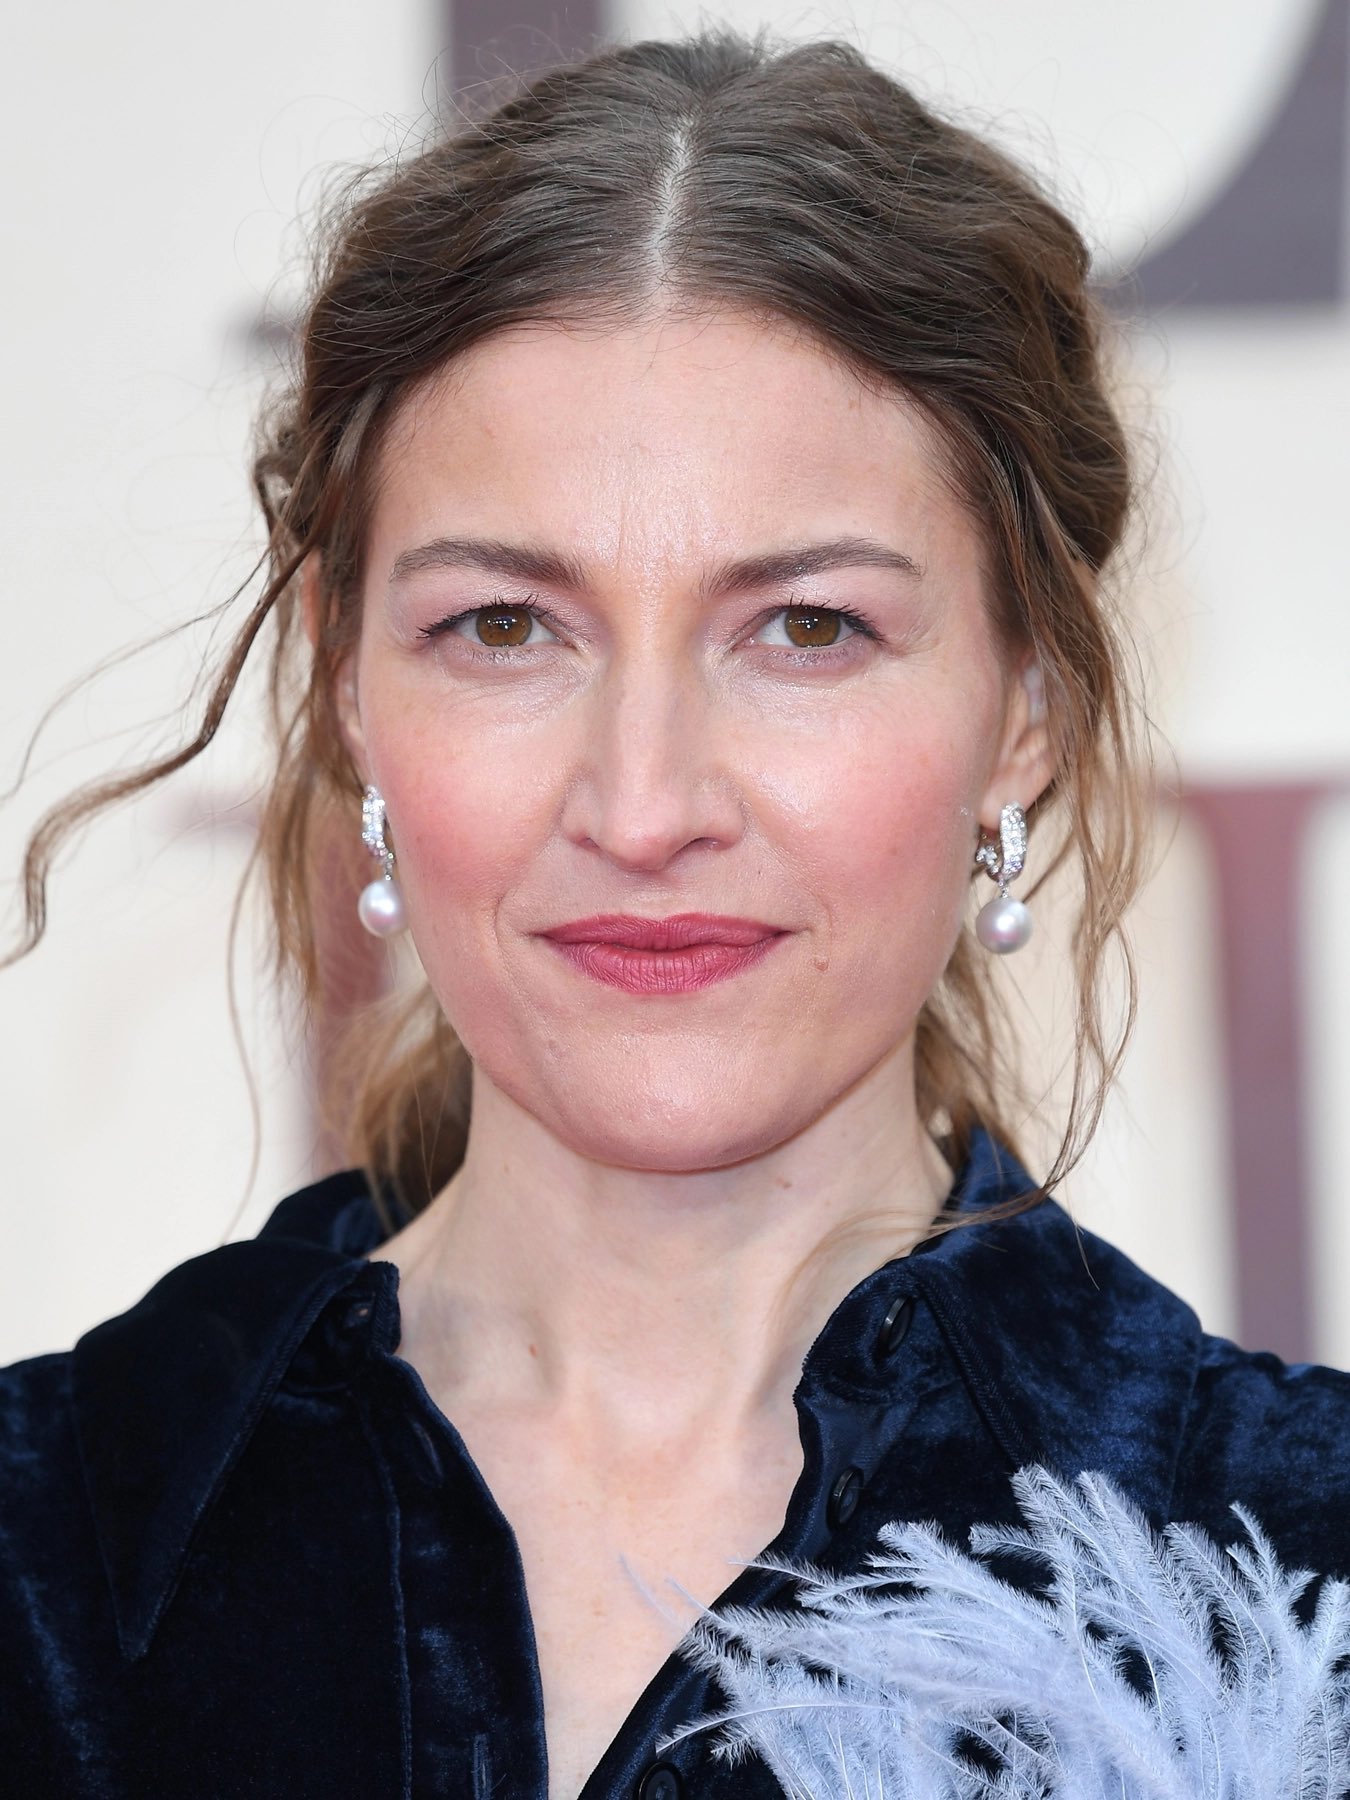  Happy birthday to Kelly Macdonald who portrayed Rowena Ravenclaw in and the Deathly Hallows - Part 2! 